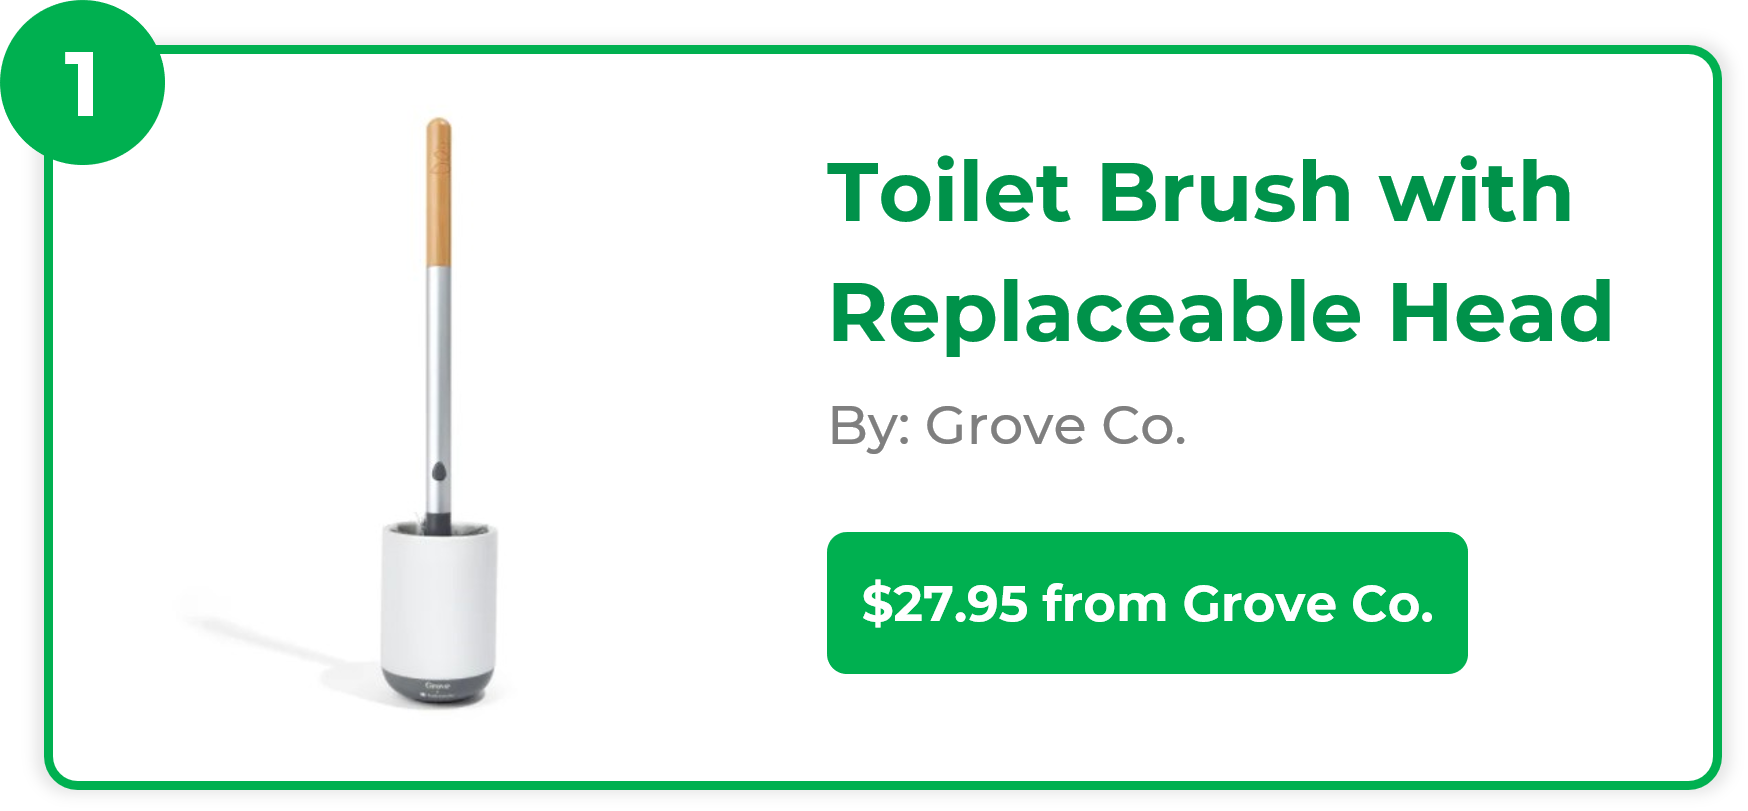 Toilet Brush with Replaceable Head - Grove Co.